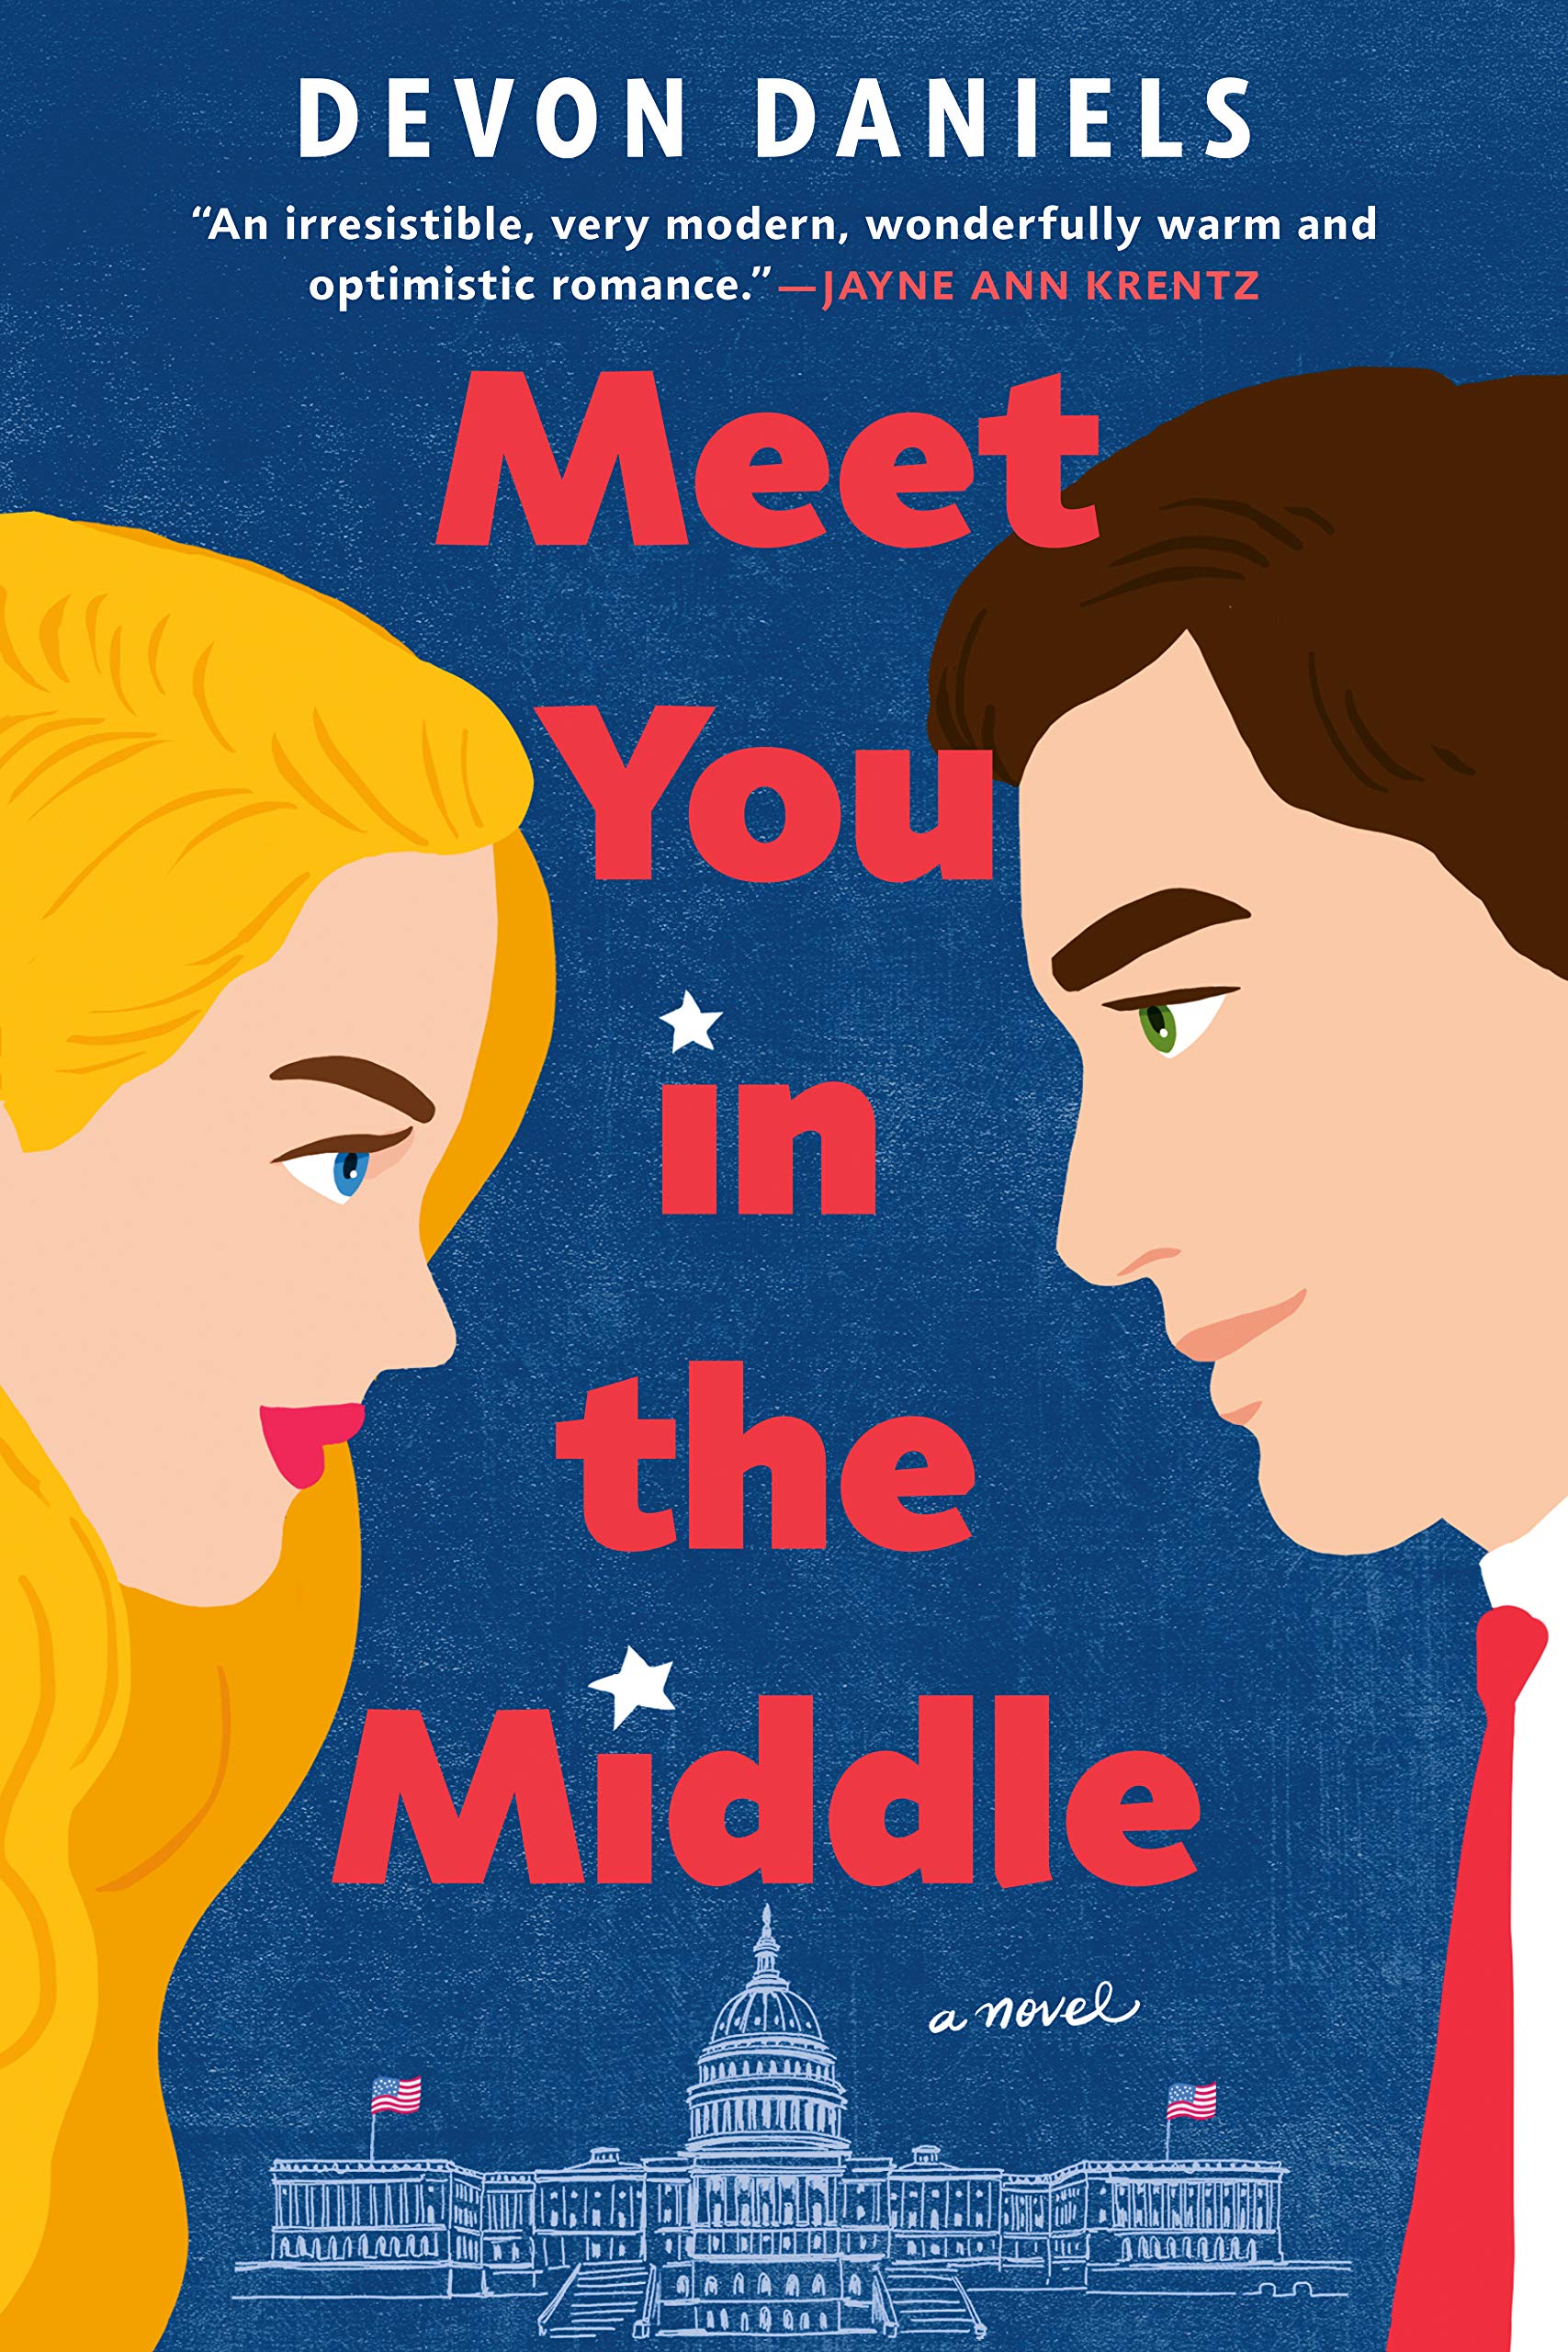 Meet You in the Middle Book Review